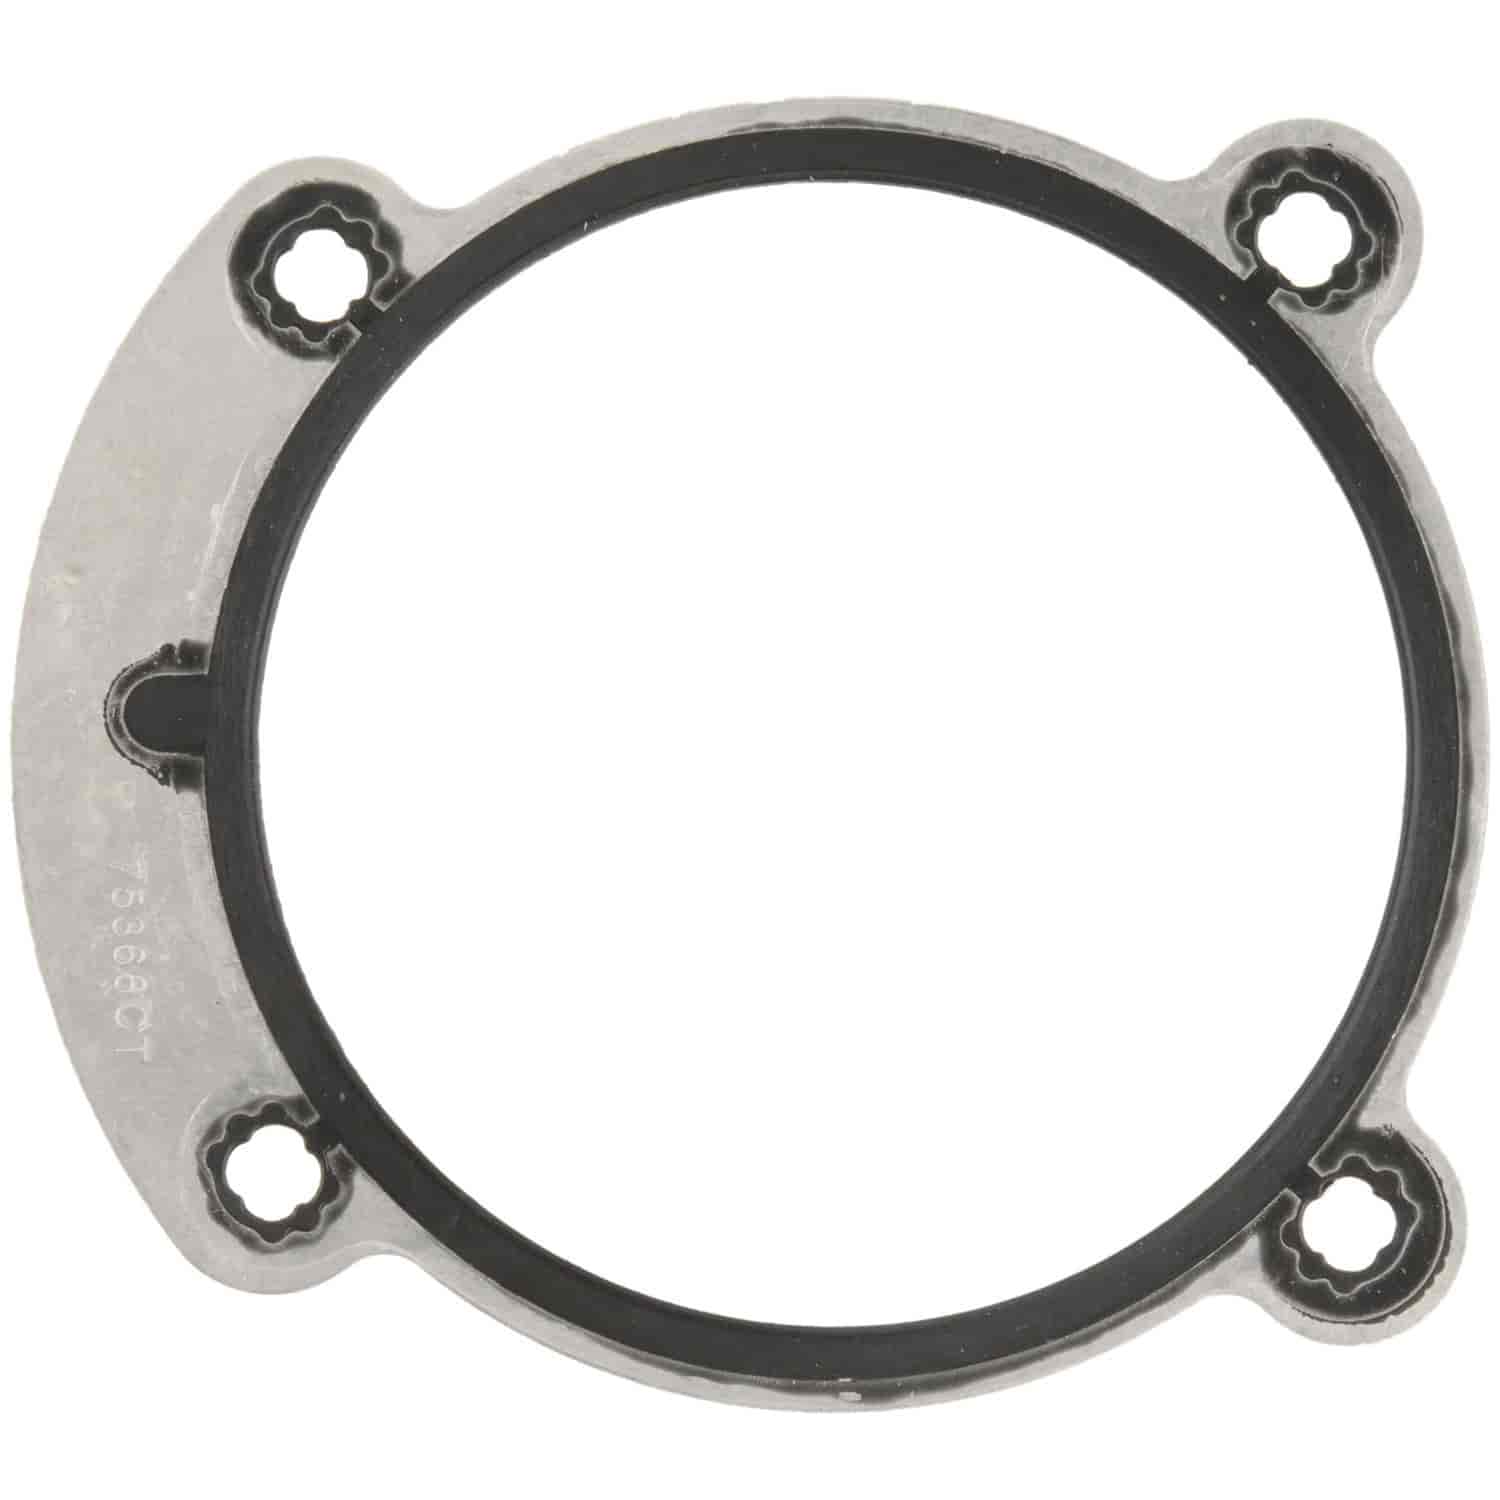 Throttle Body Gasket GM 3.6L Vin 7 2004-2008 Cadillac SRX CTS STS Buick Lacross Rendezvous